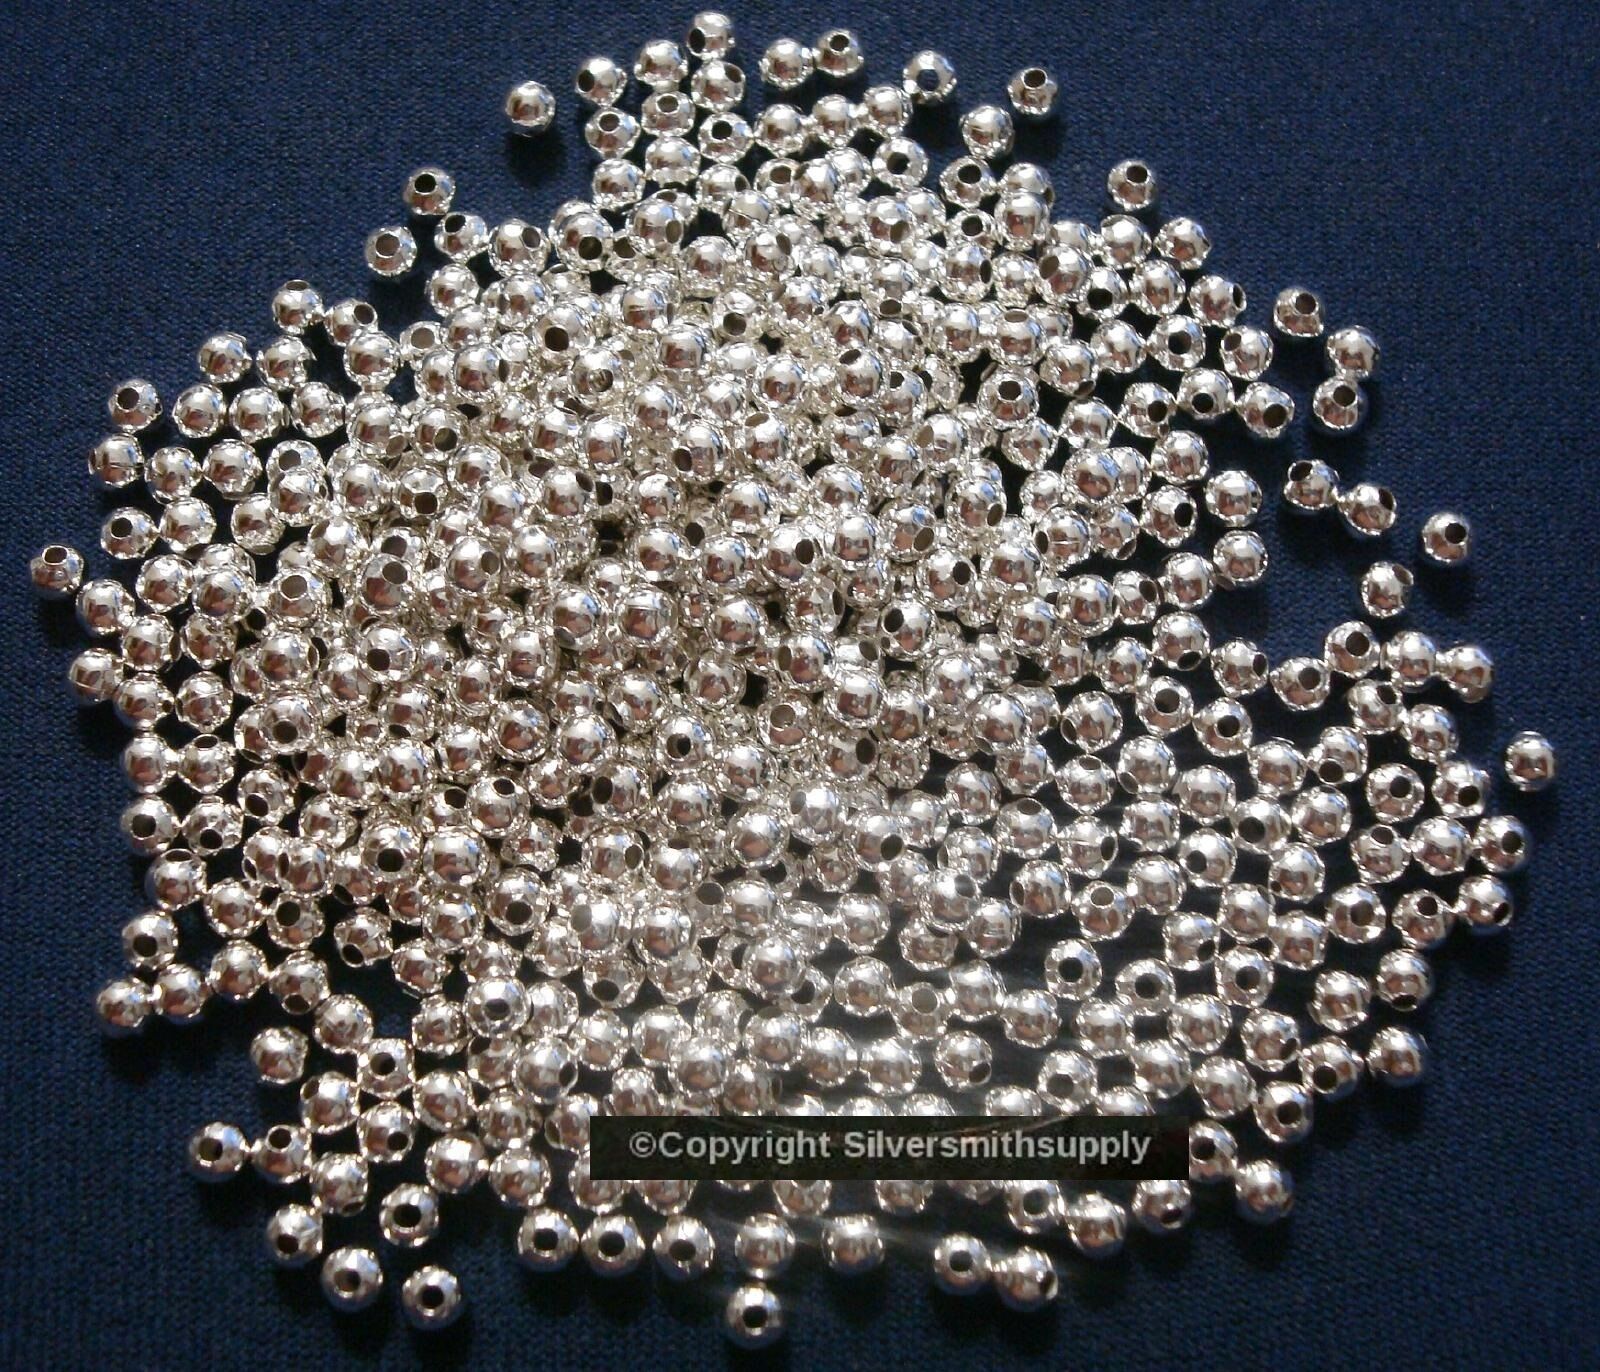 Sterling silver plated 4mm (approximately) round spacer beads 500 pc lot fpb033